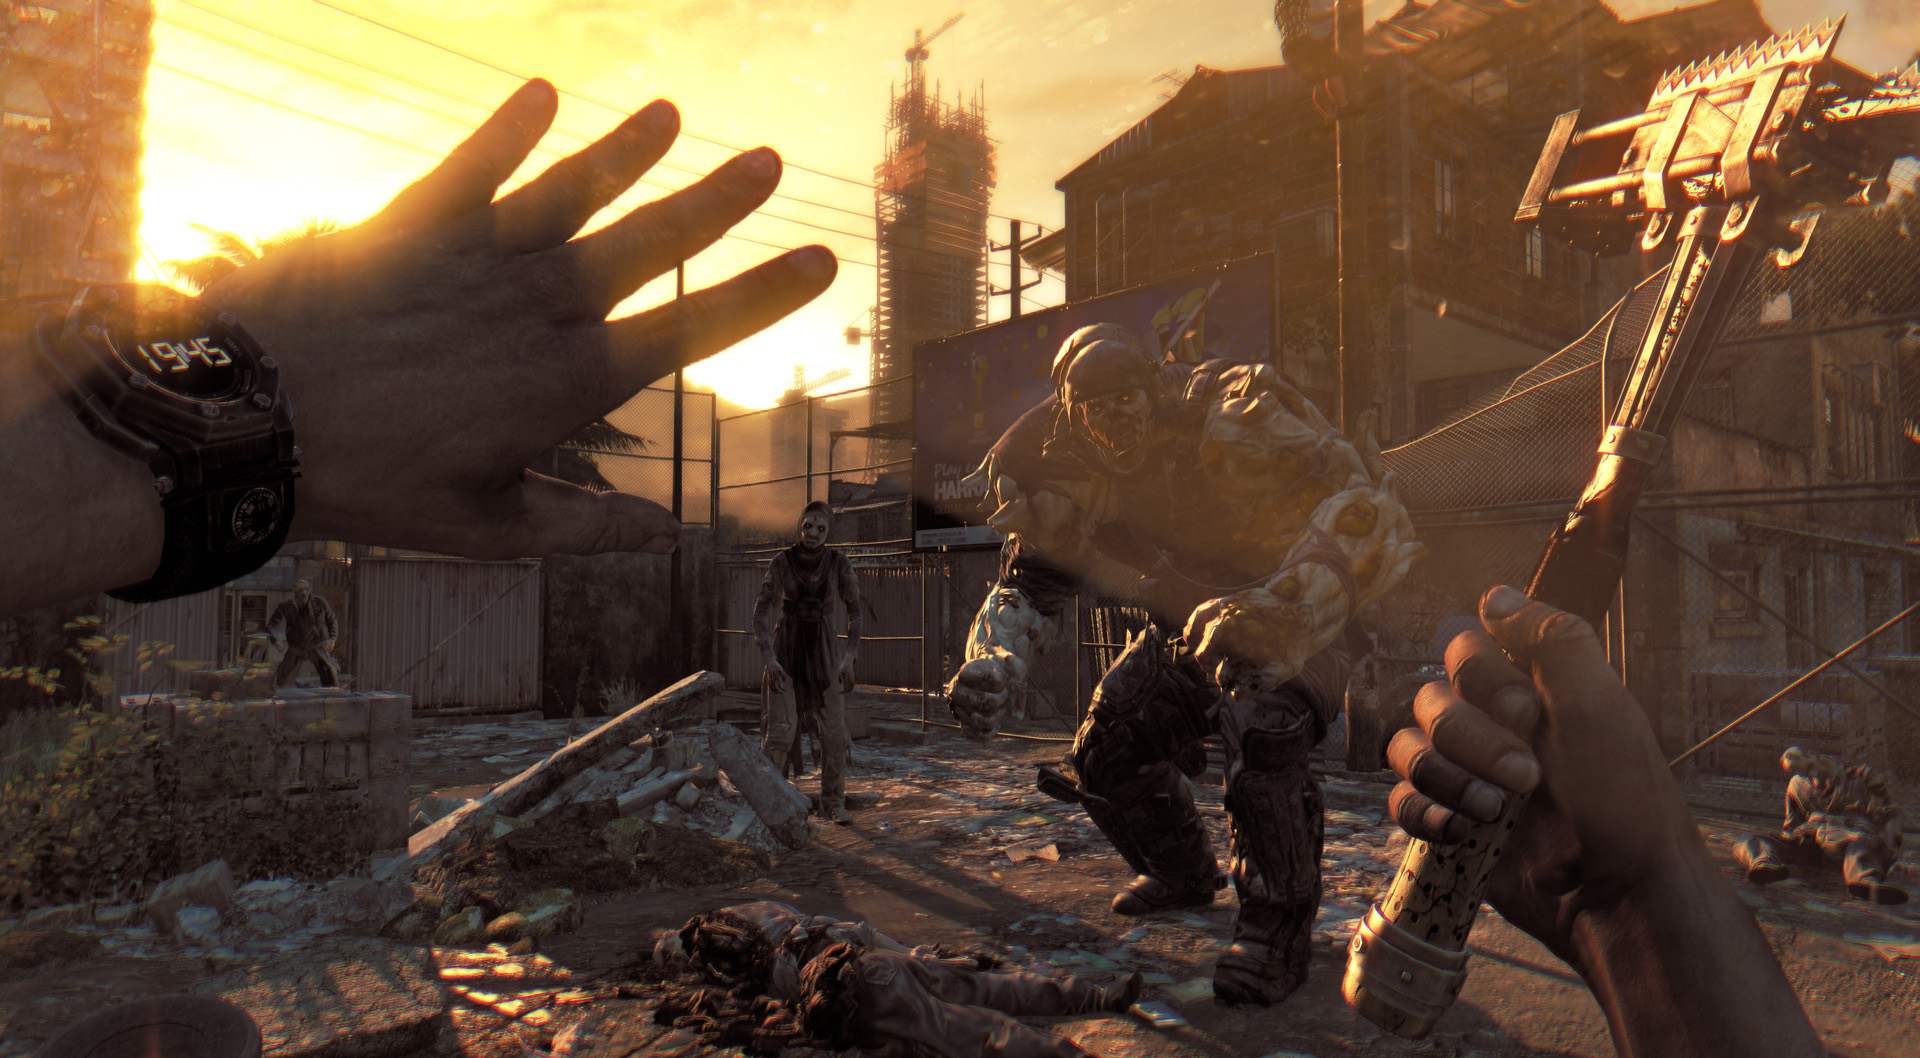 Dying Light Dark Apocalyptic Zombie R Wallpaper Background